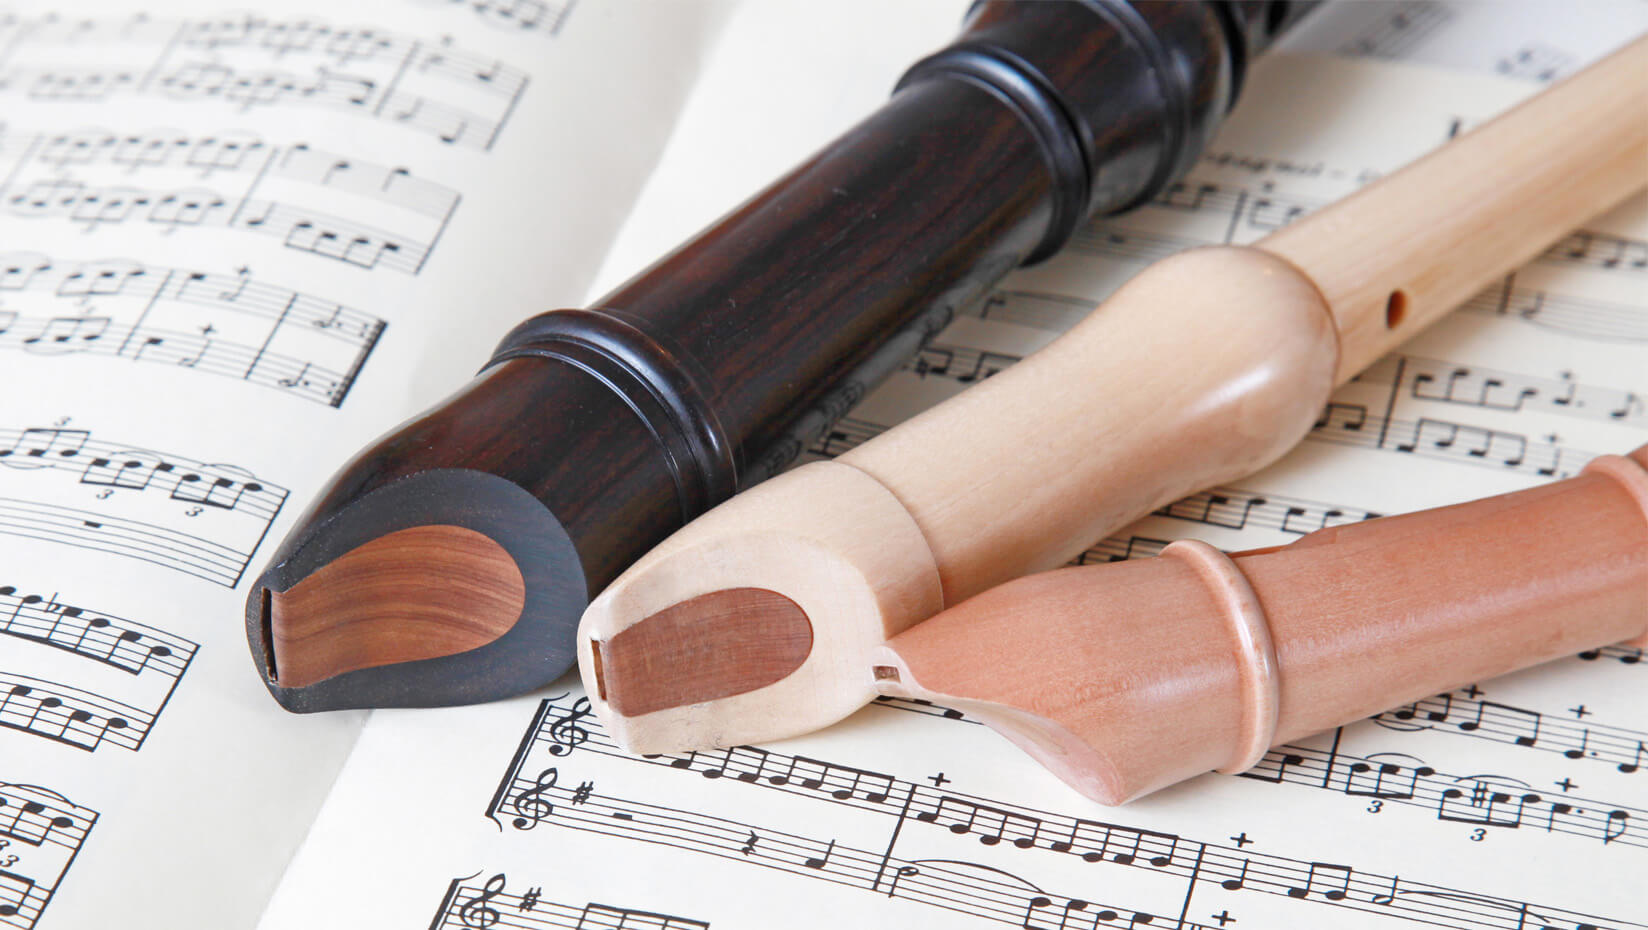 Recorders and sheet music